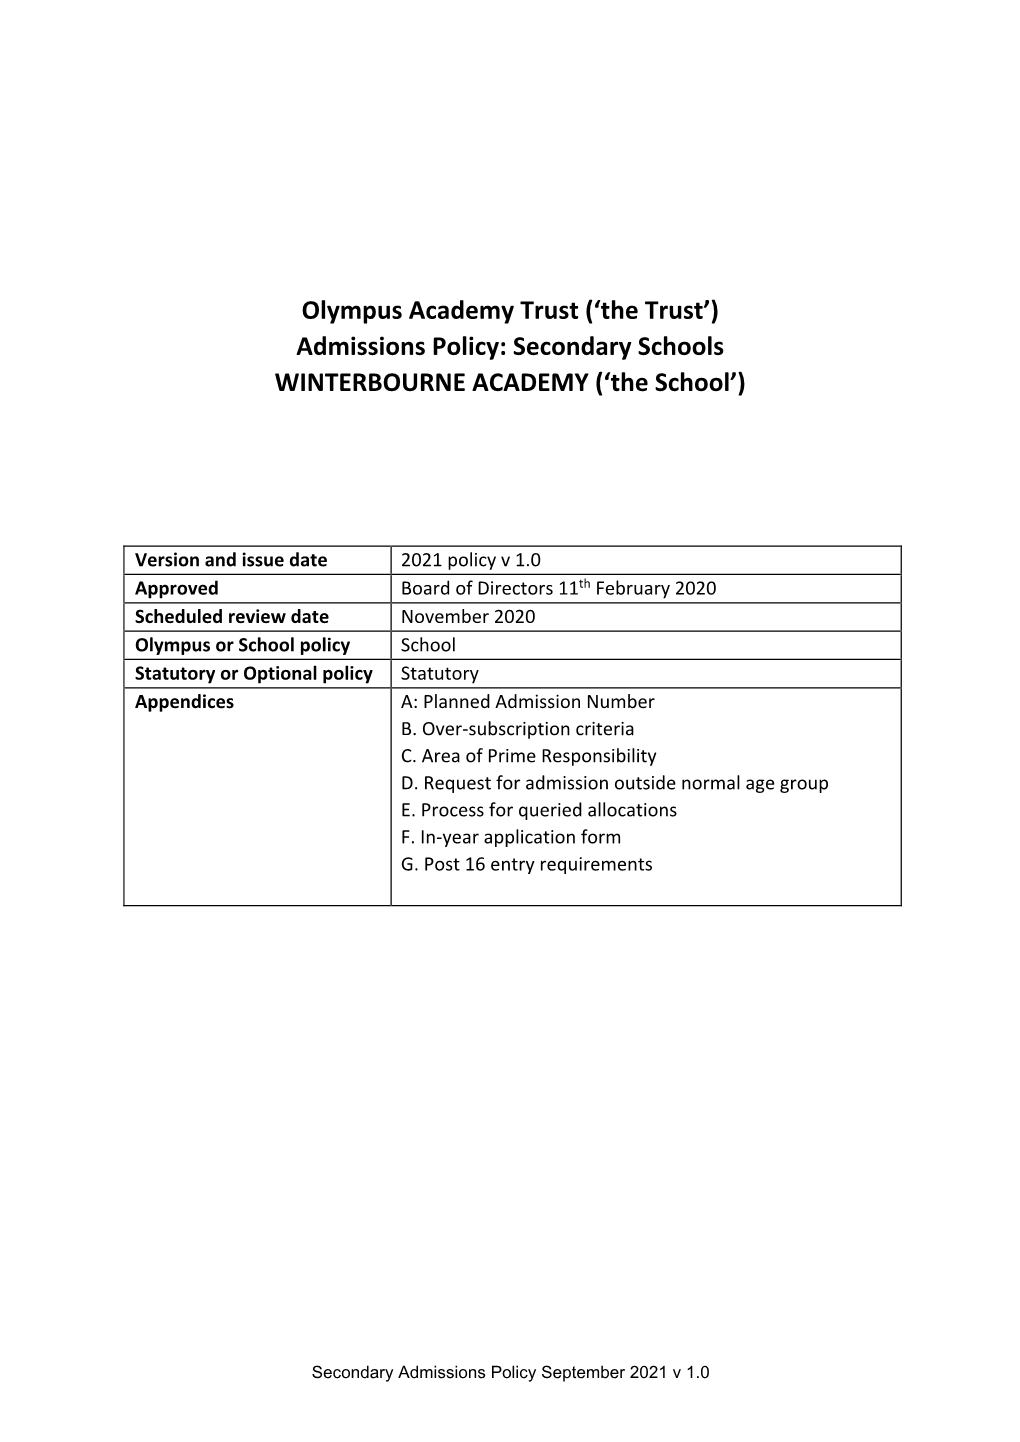 Admissions Policy: Secondary Schools WINTERBOURNE ACADEMY (‘The School’)